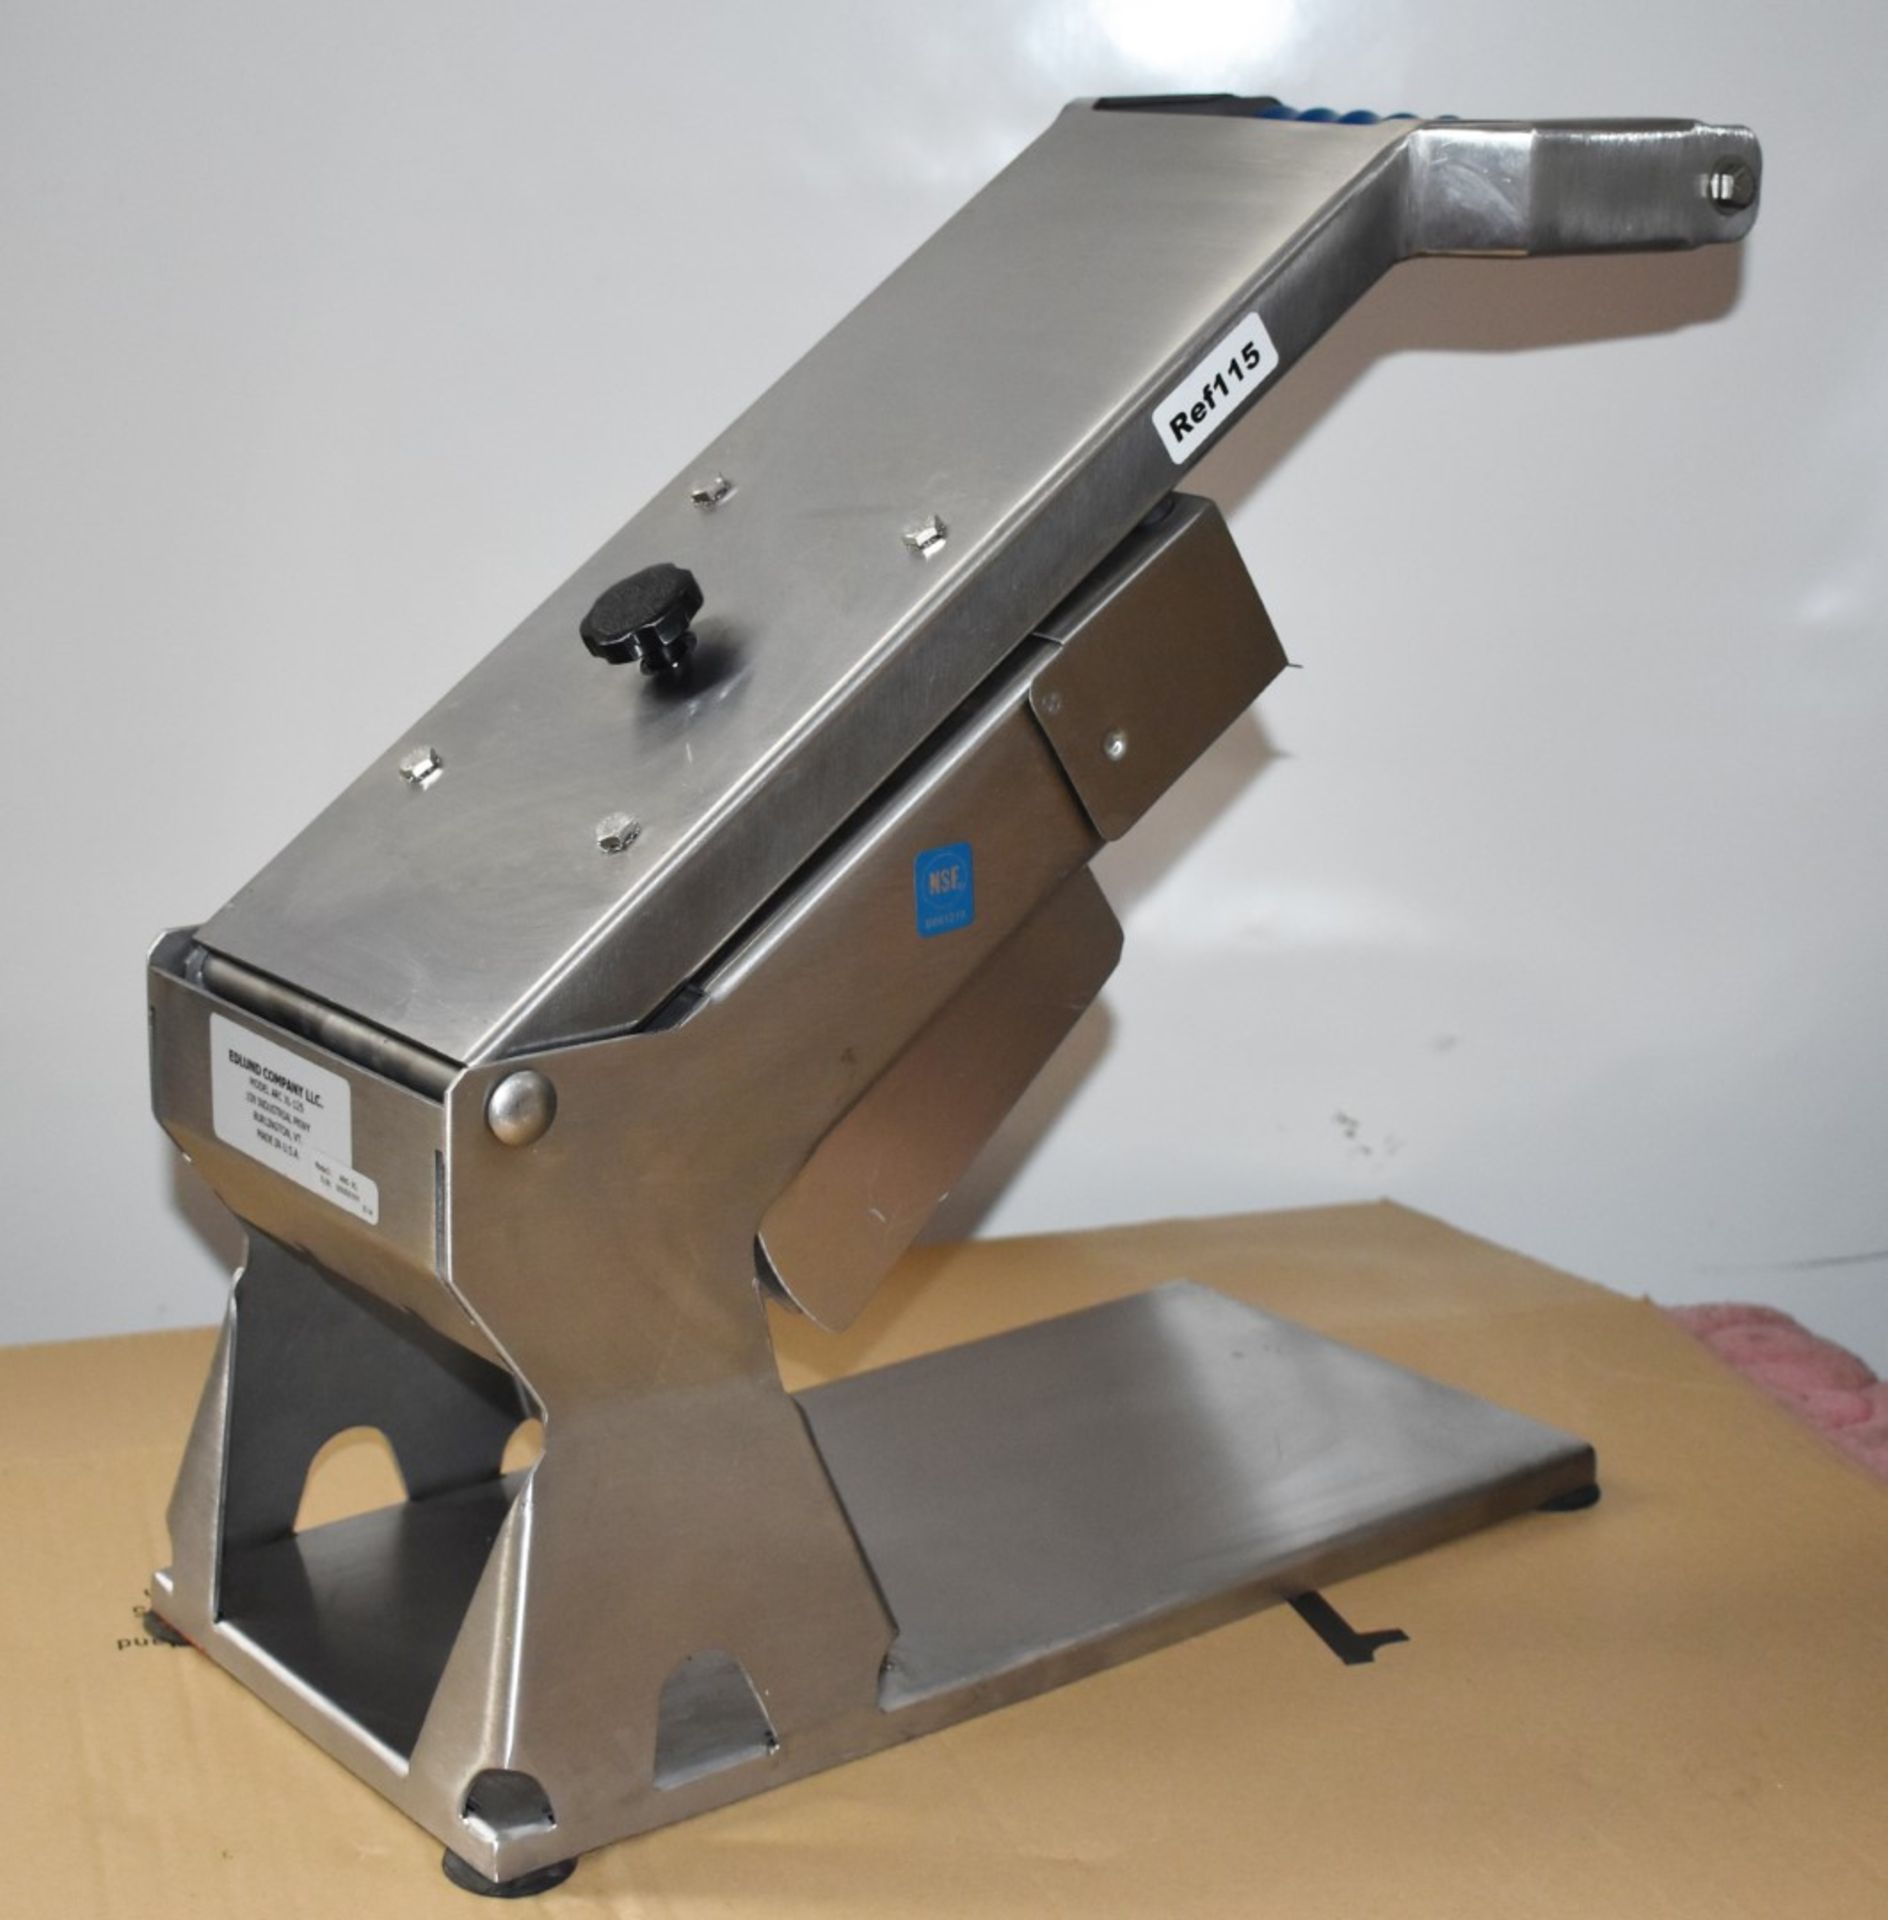 1 x Edlund XL-125 ARC Manual Fruit and Vegetable Slicer With Blades - CL232 - Ref115 - Location: - Image 2 of 11